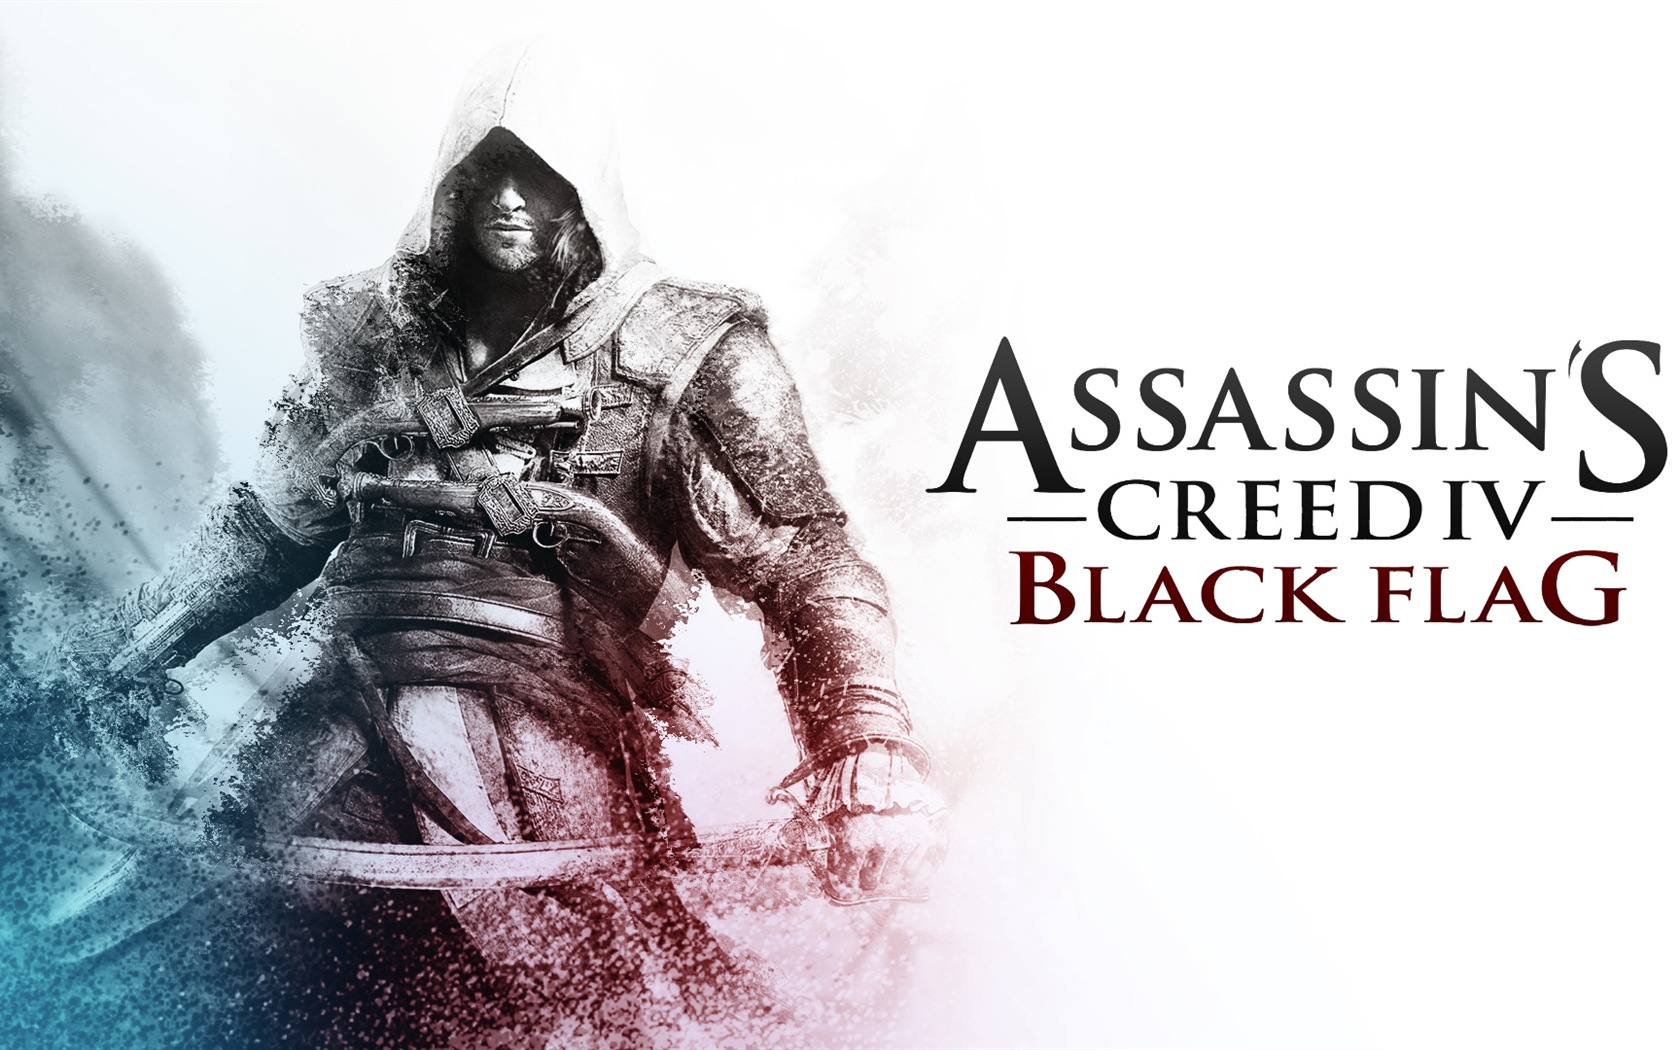 Creed IV Assassin: Black Flag HD wallpapers #16 - 1680x1050